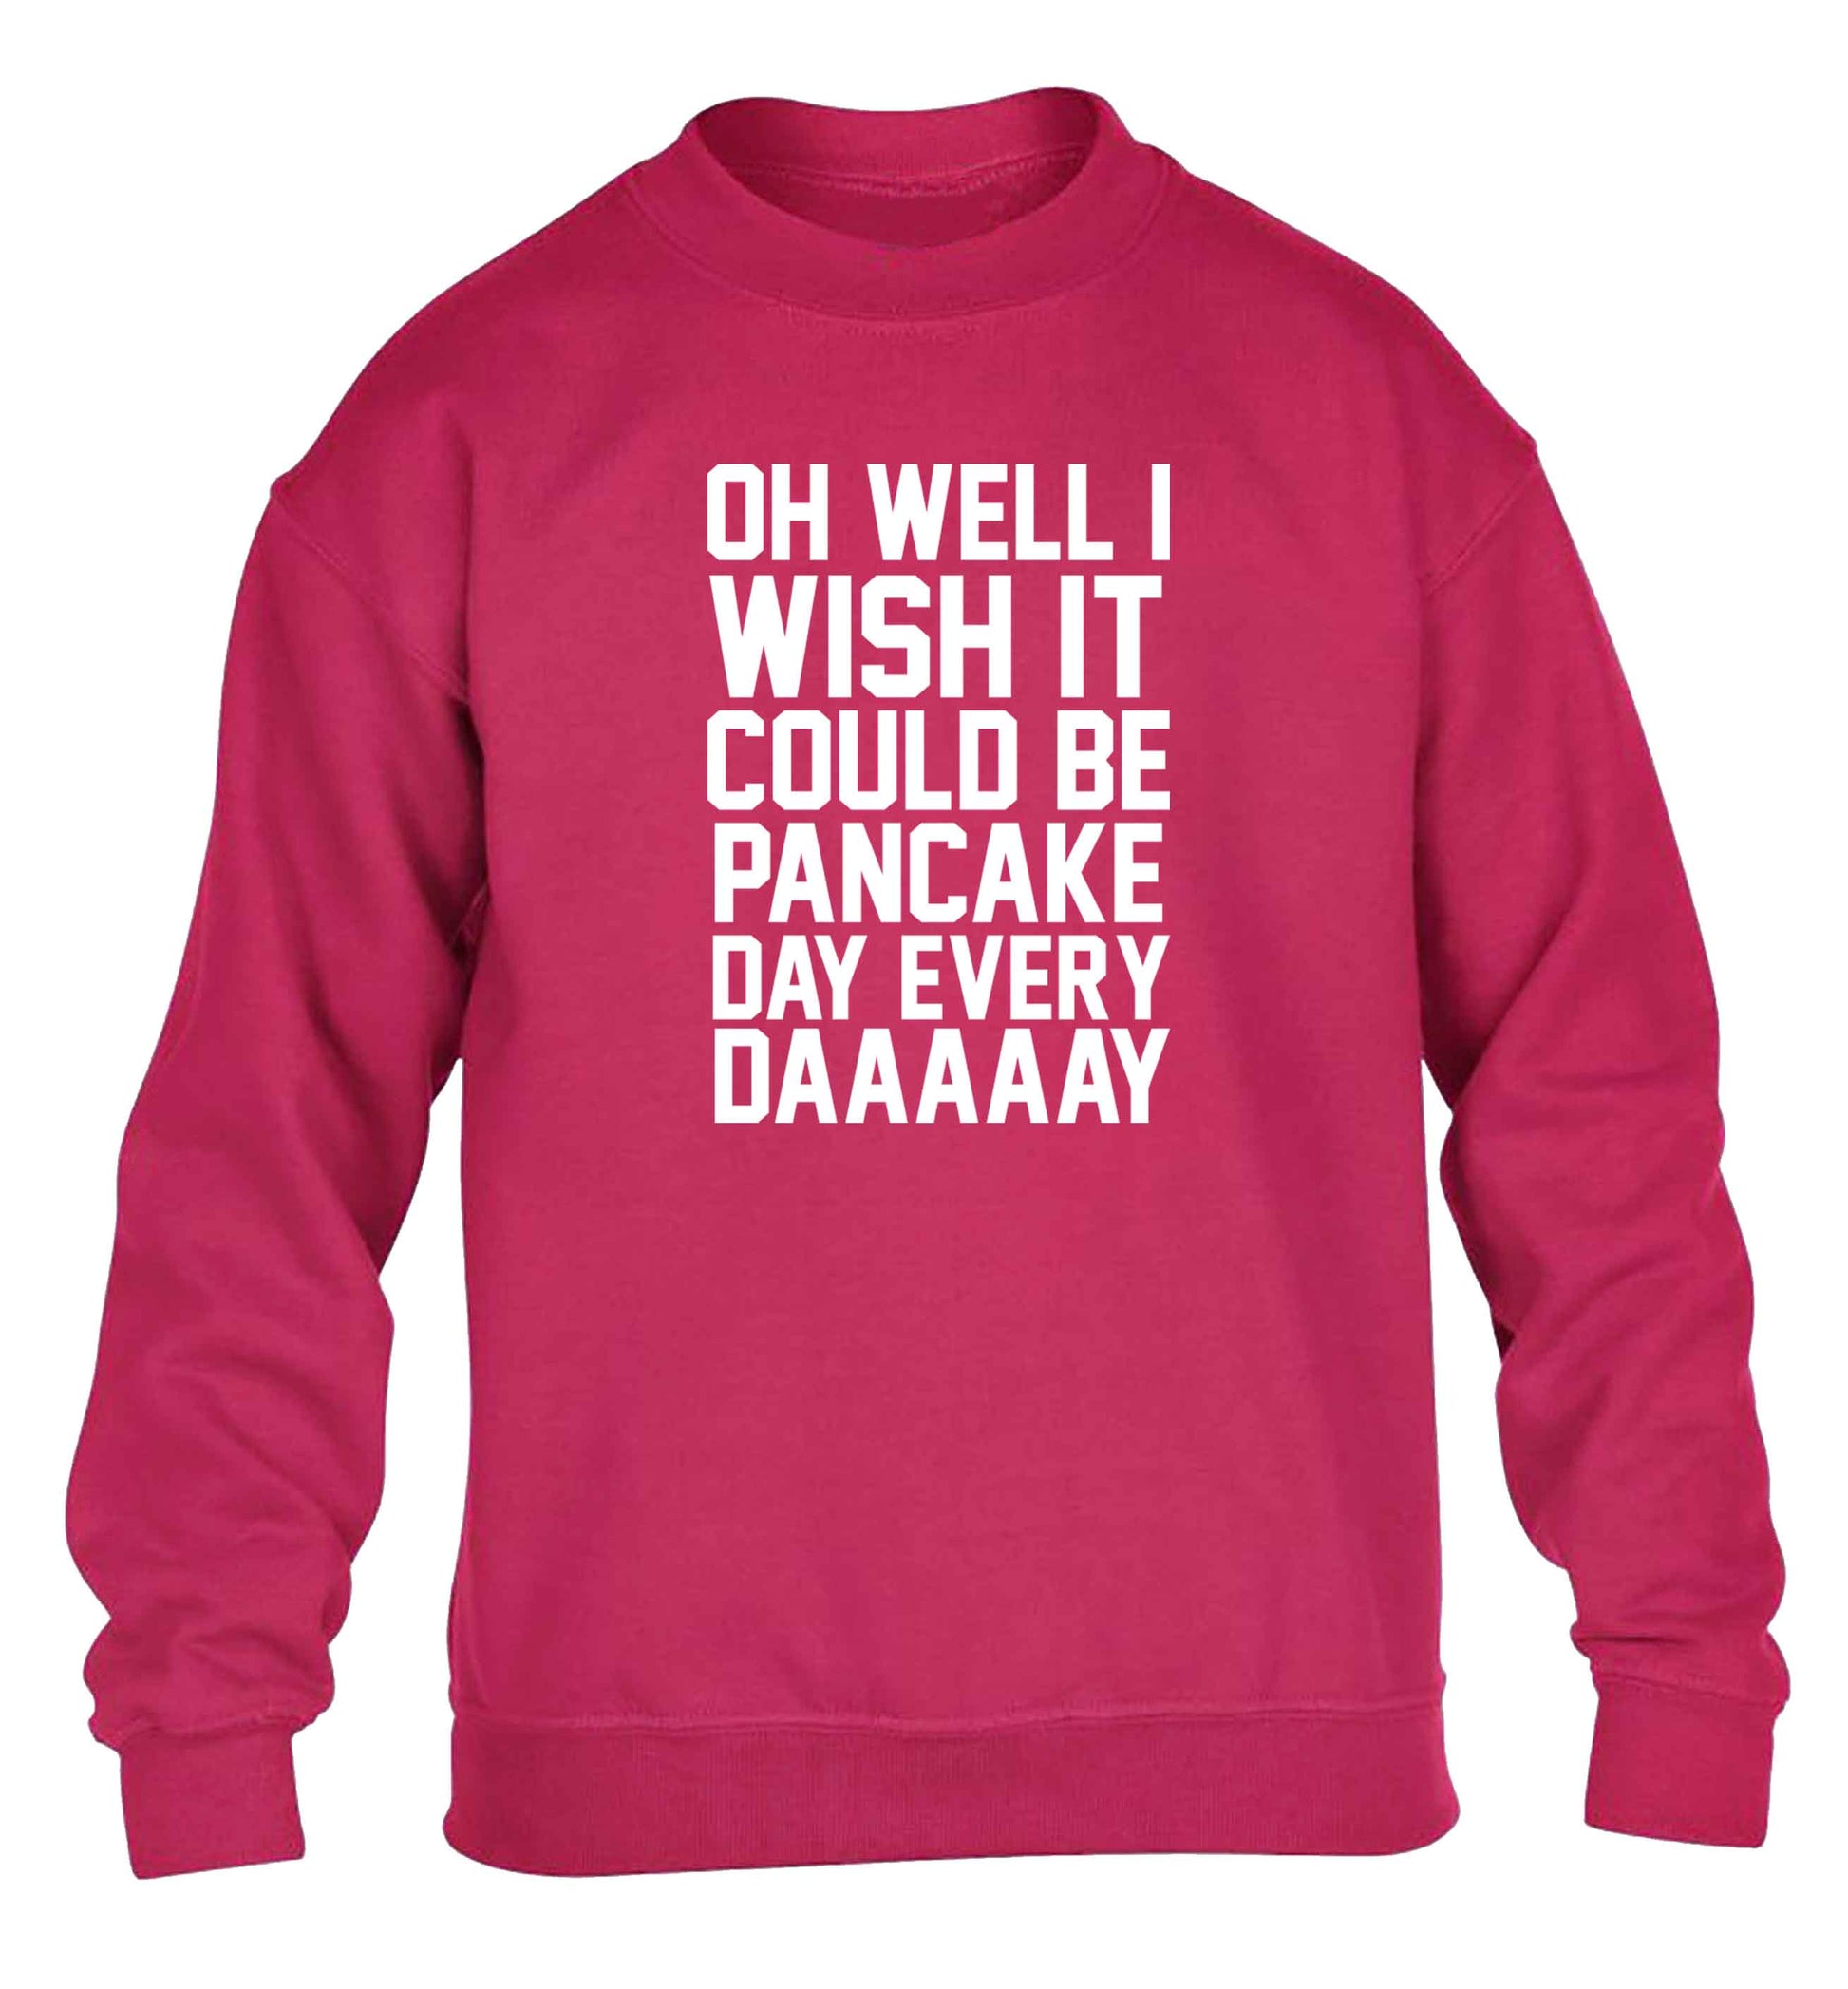 Oh well I wish it could be pancake day every day children's pink sweater 12-13 Years